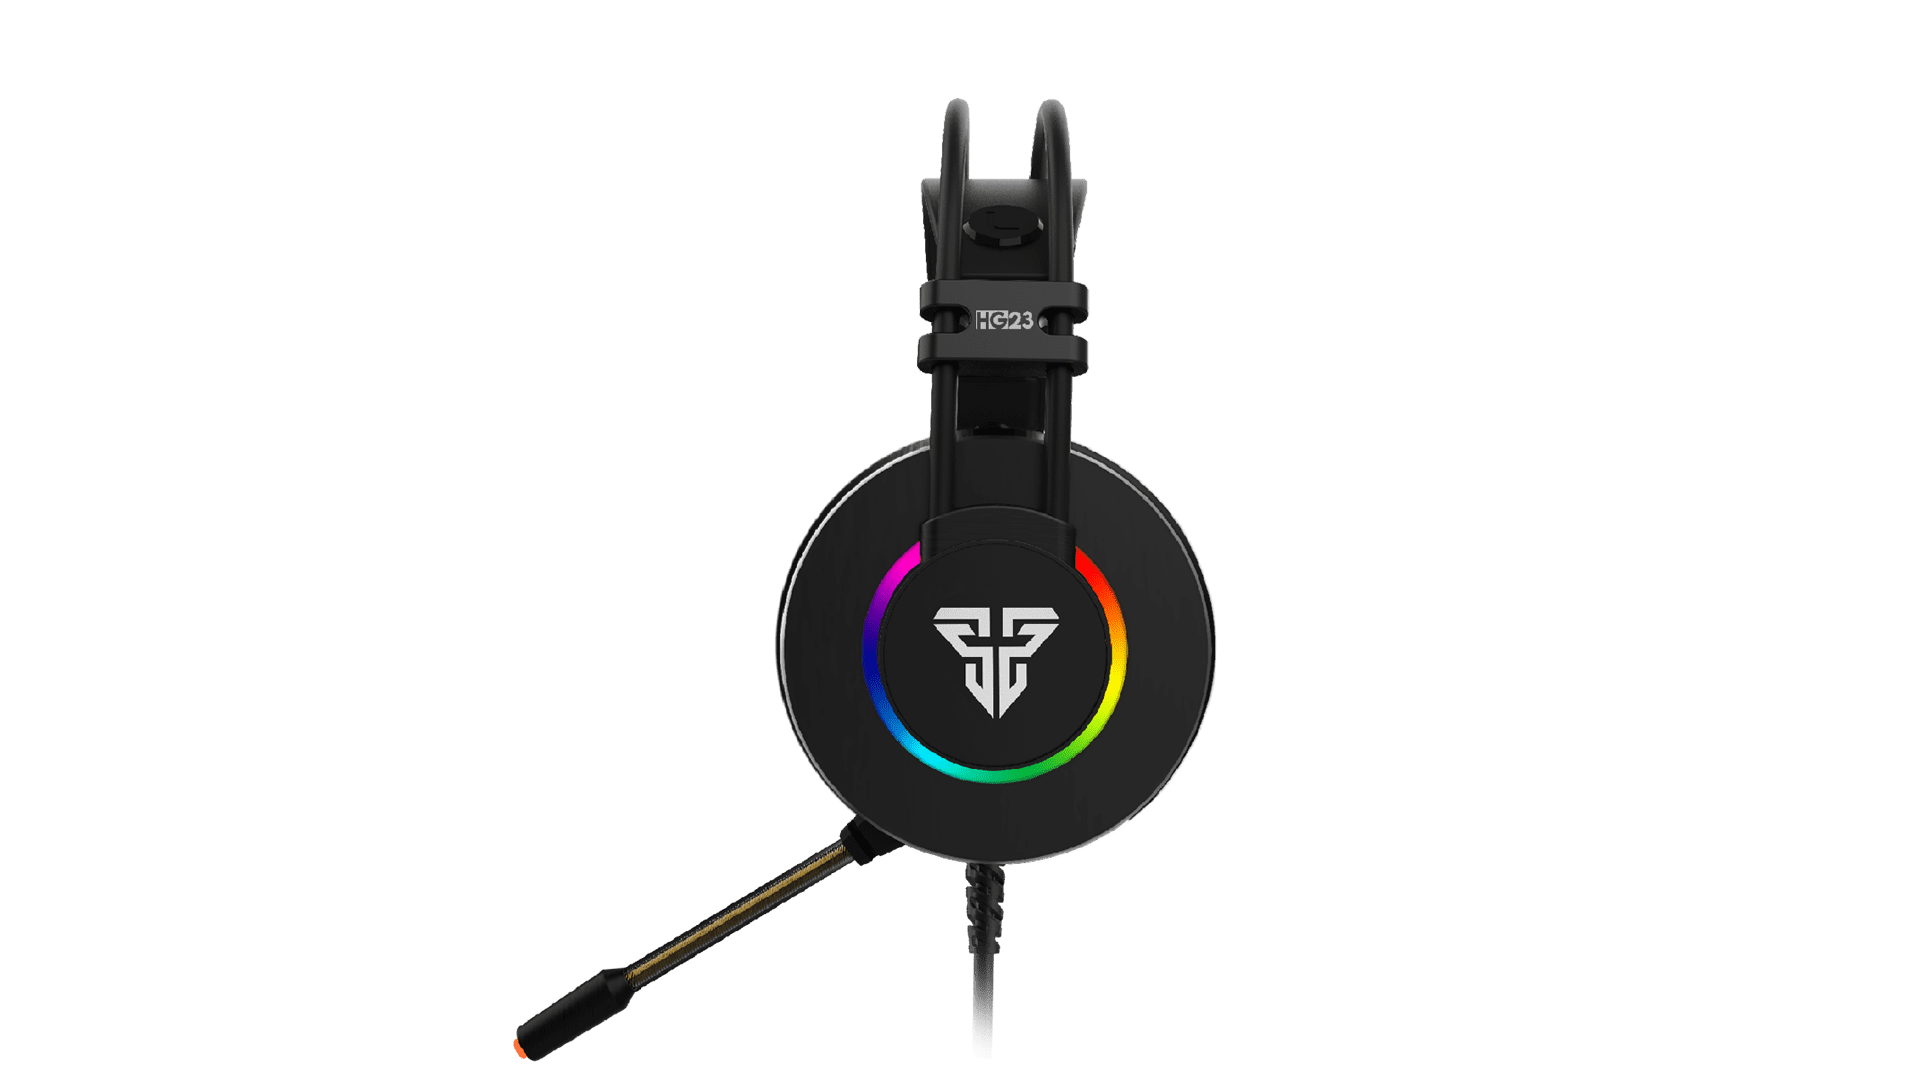 FANTECH HG23 OCTANE 7.1 RGB Gamig Headphone With 360 Surround Sound And Noise Cancelling Microphone